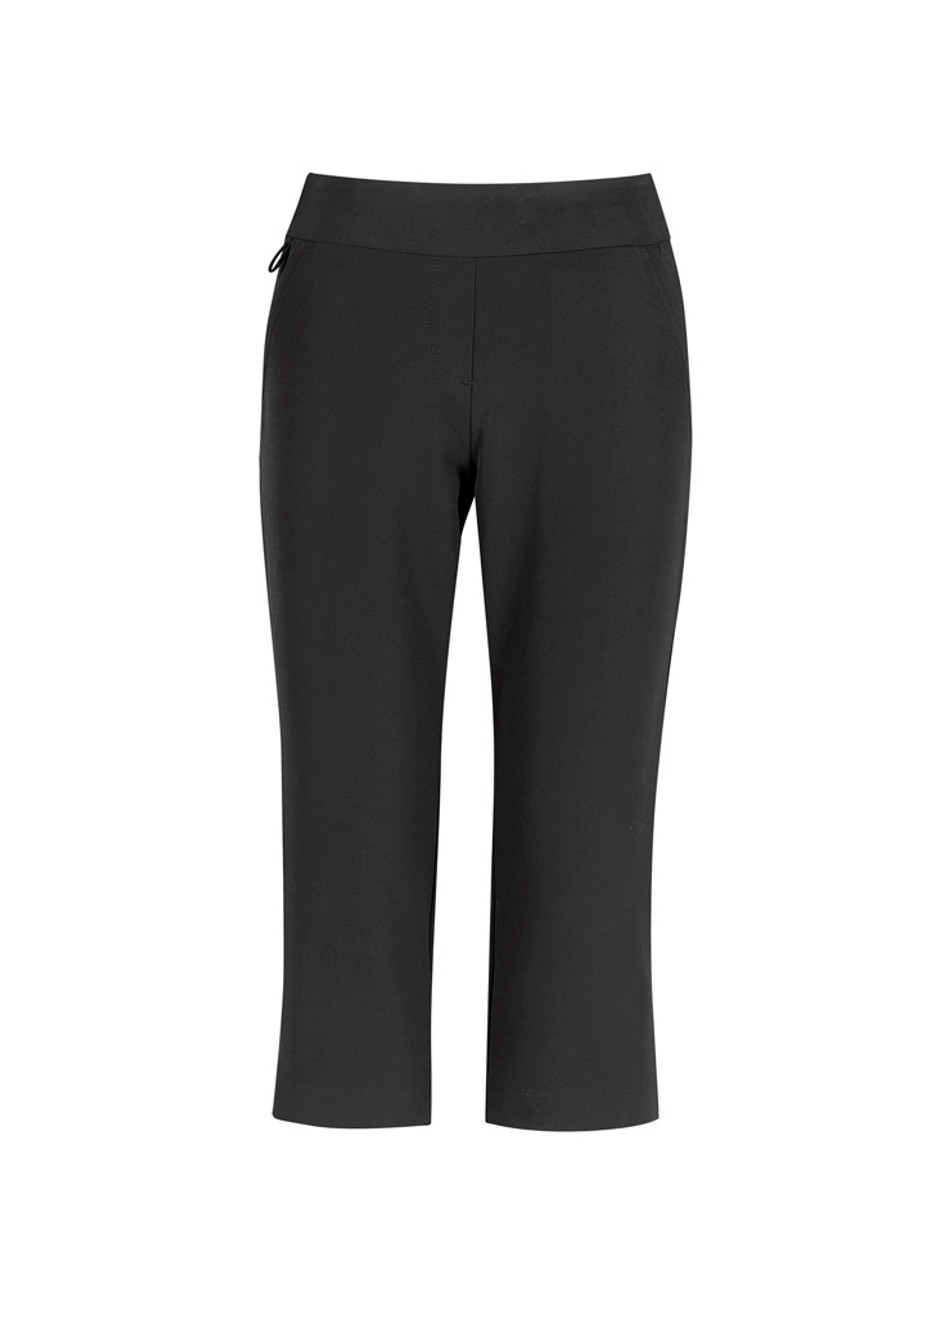 Biz Care CL040LL Womens Jane 3/4 Length Stretch Pant | Available Colours: Charcoal, Black, Navy